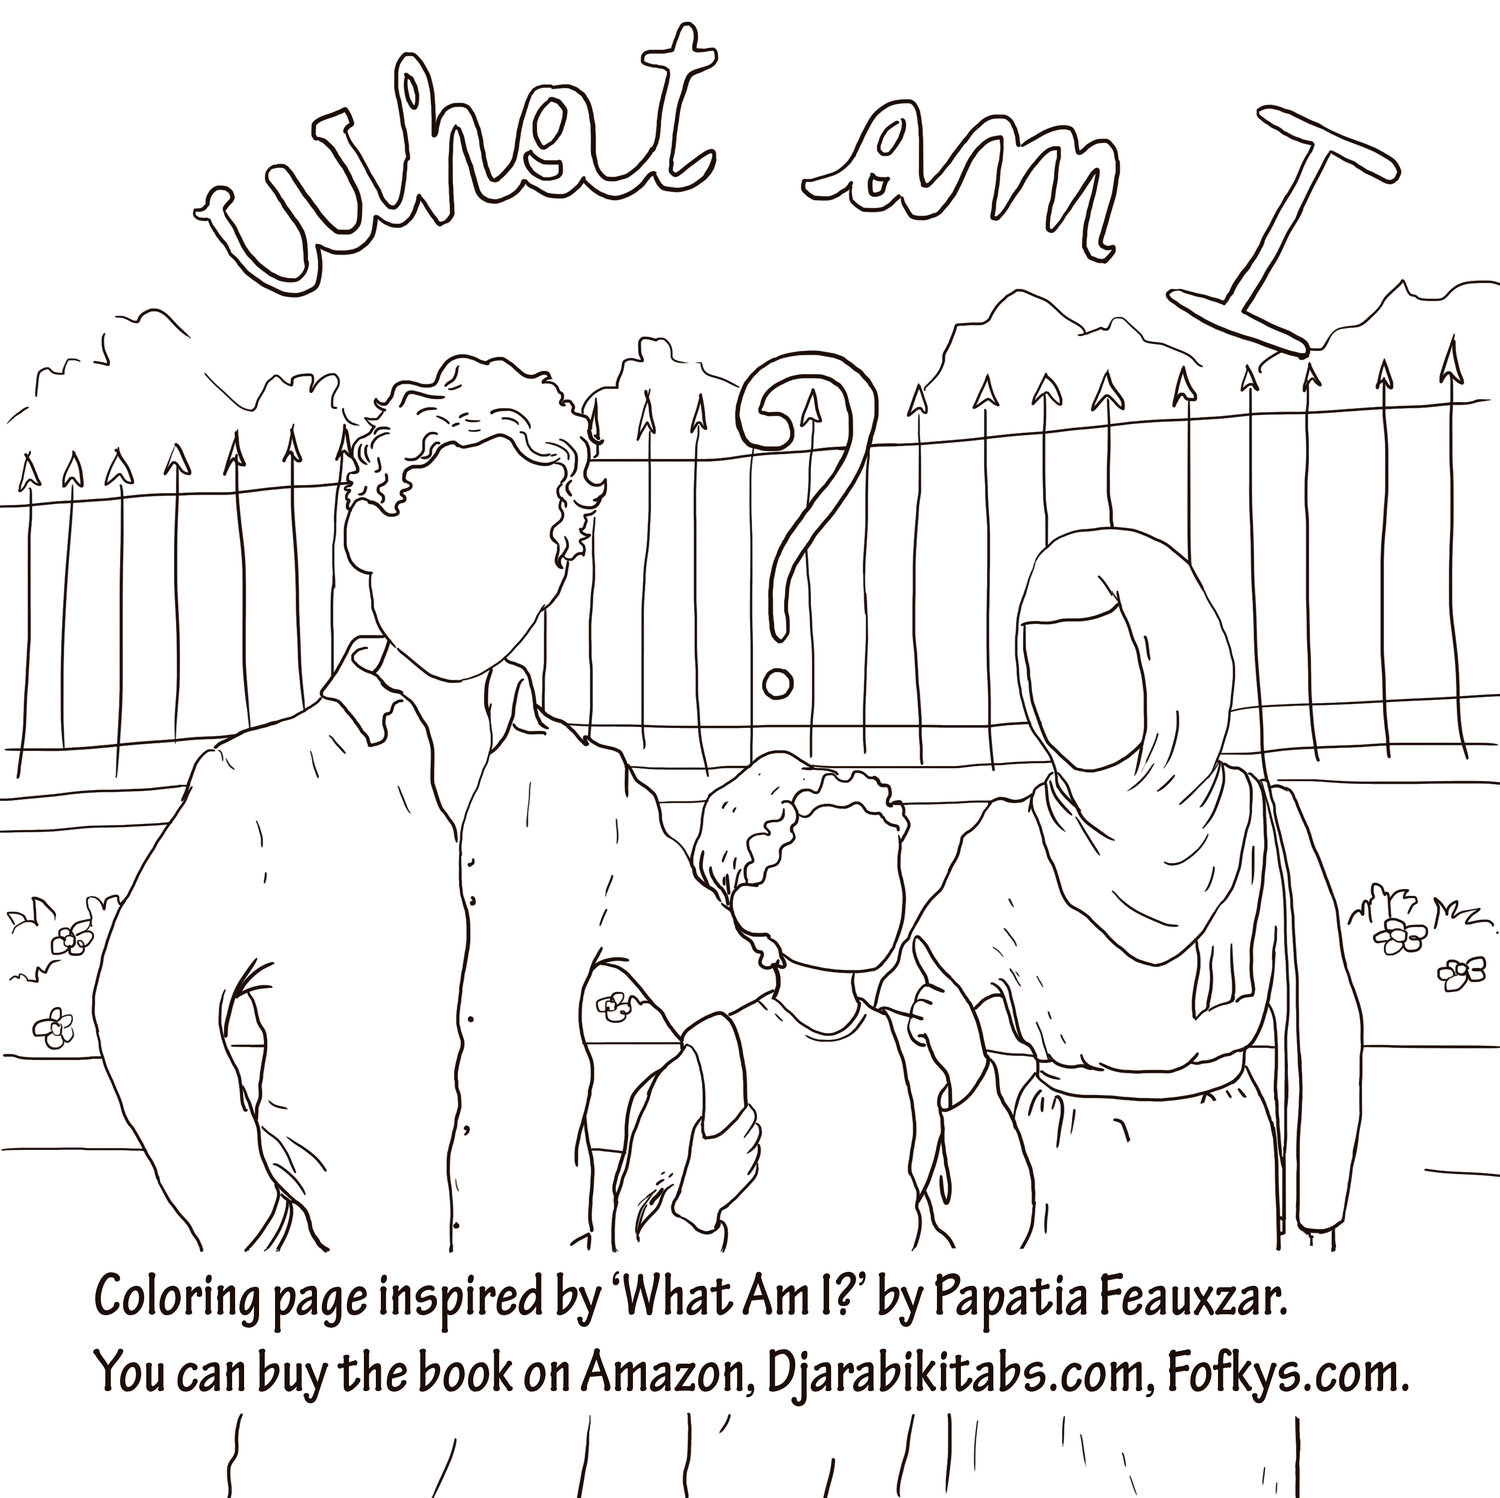 FREE DOWNLOAD : COLORING PAGES FROM OUR CHILDREN'S BOOKS — Djarabi